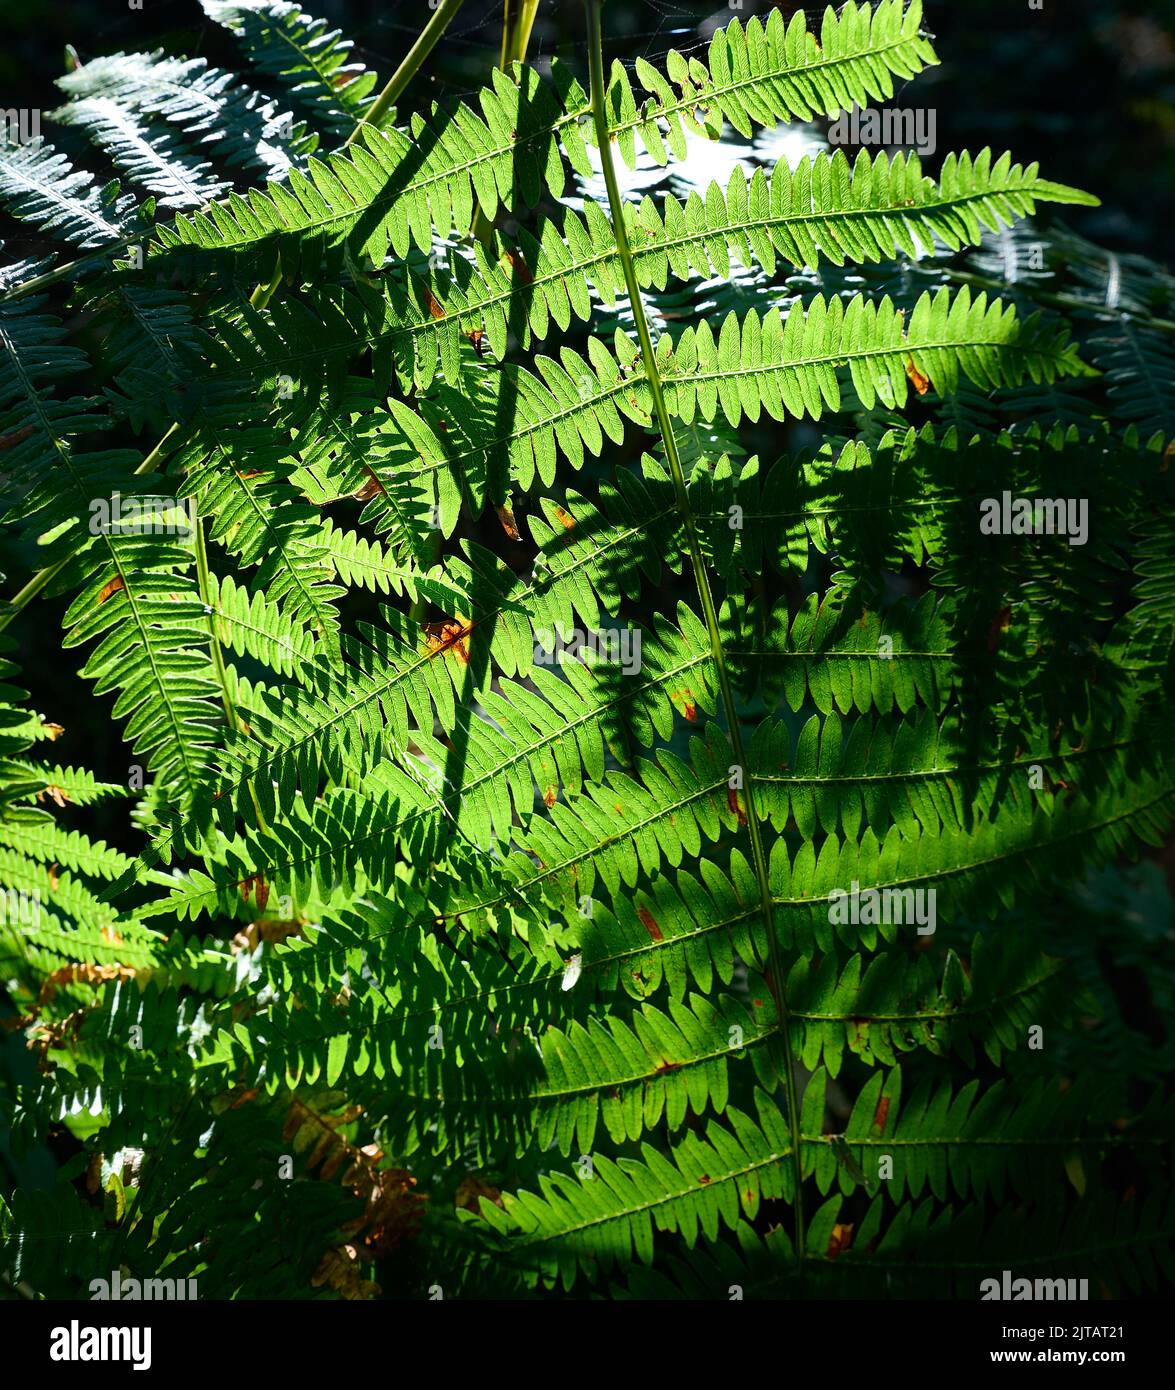 Backlit Fern leaf texture at sunset in a forest. Stock Photo